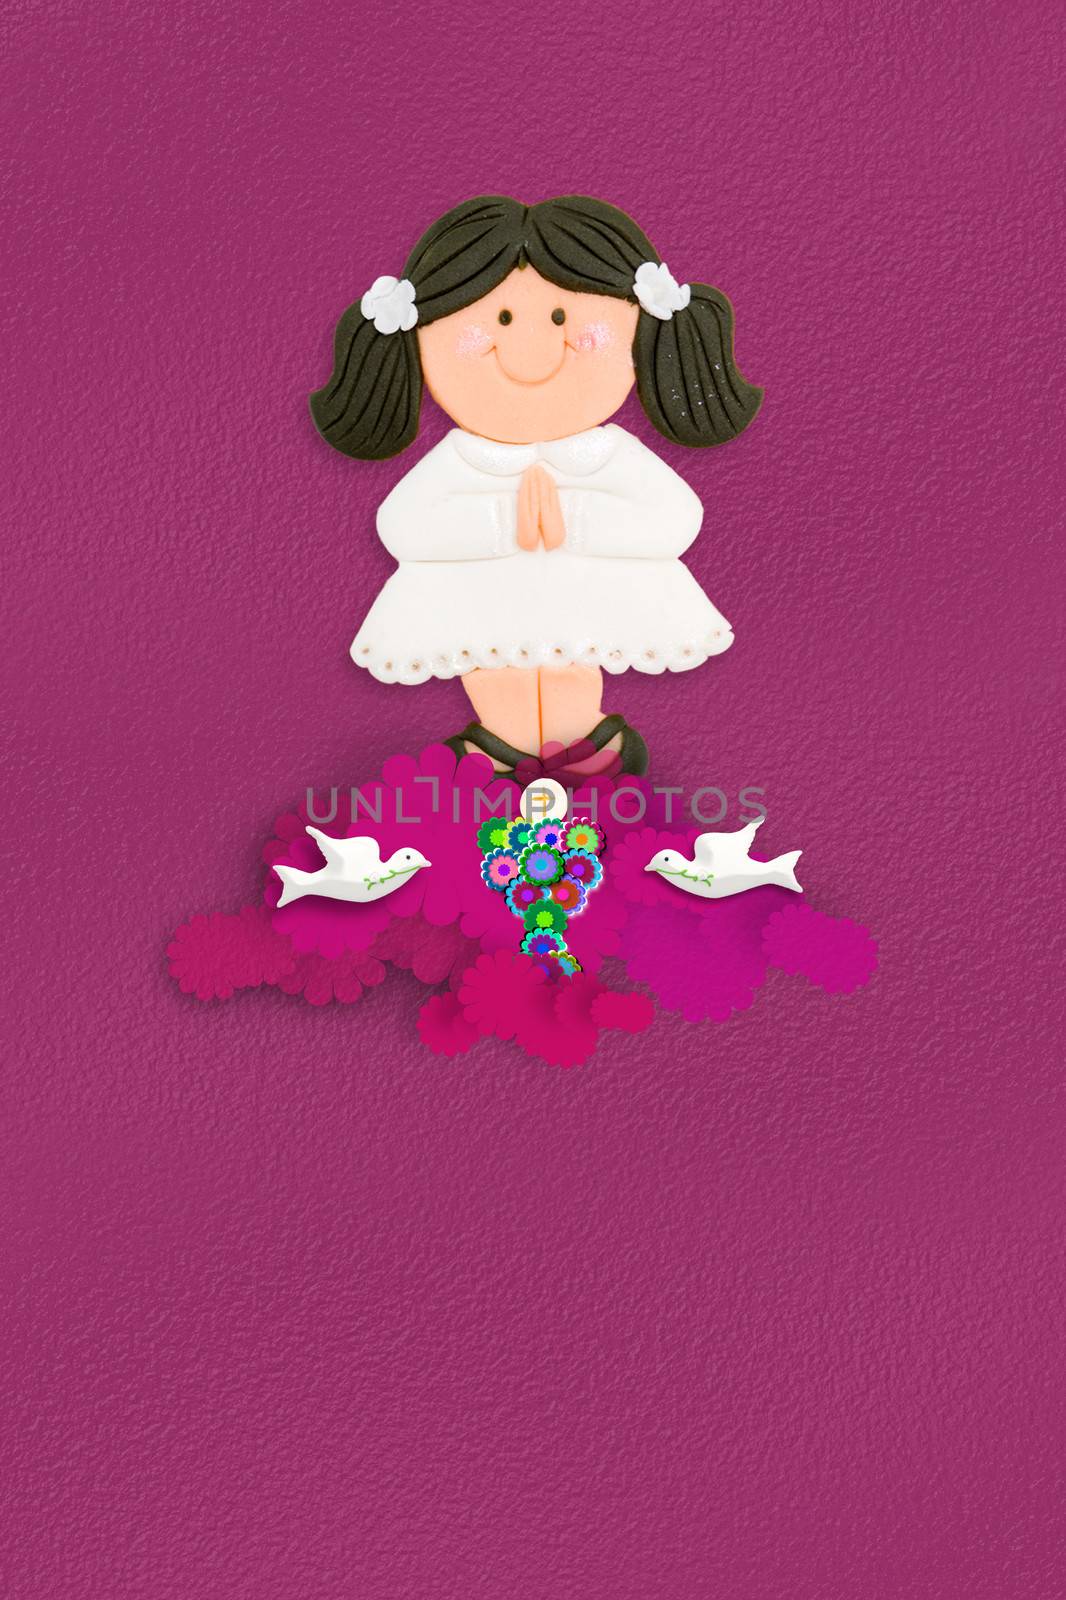  brown hair girl Holy Communion card by Carche